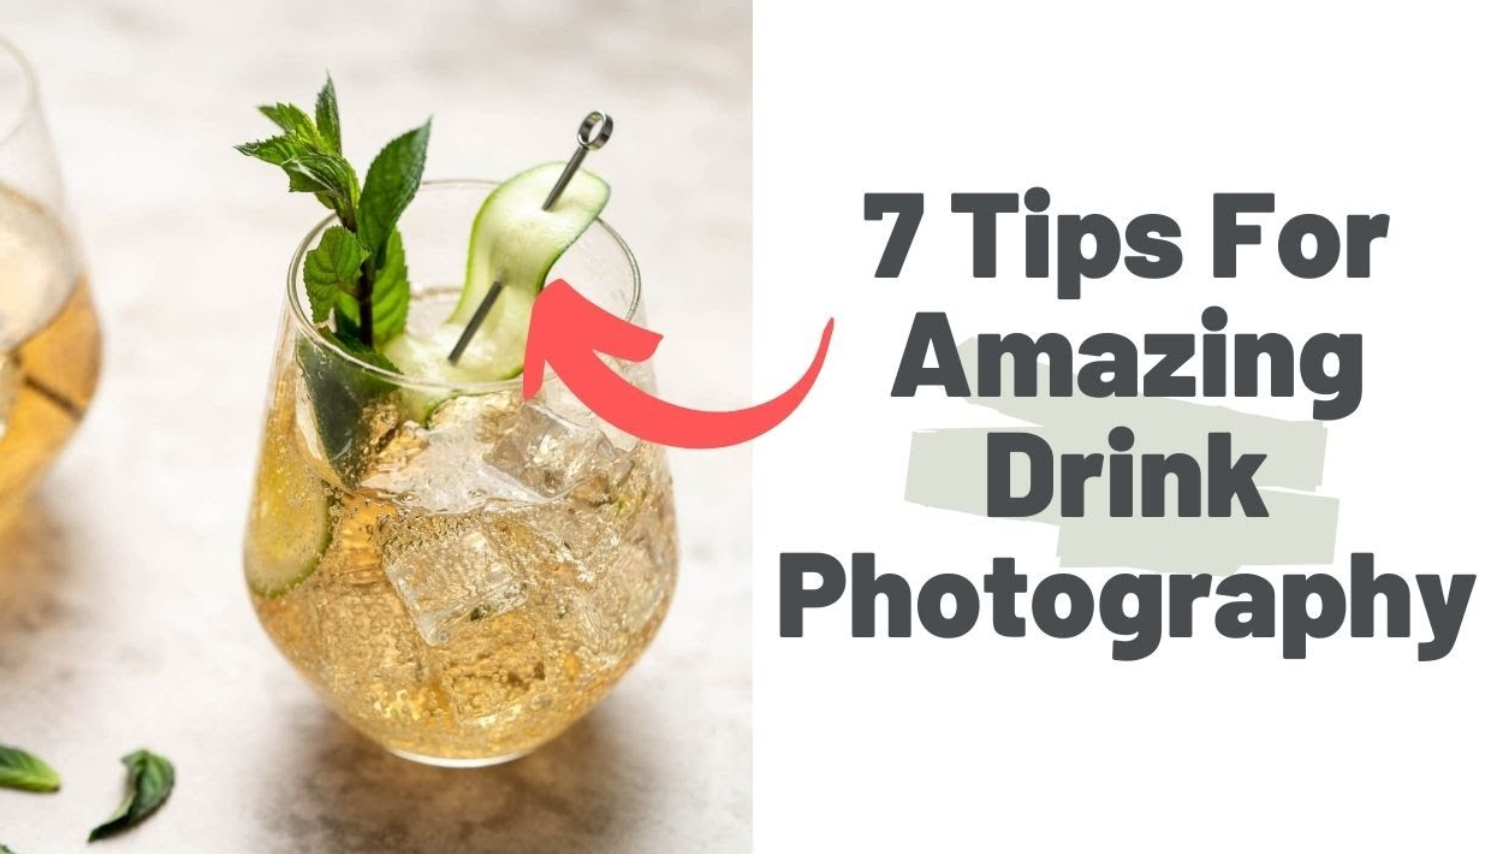 Drink Photography Tips